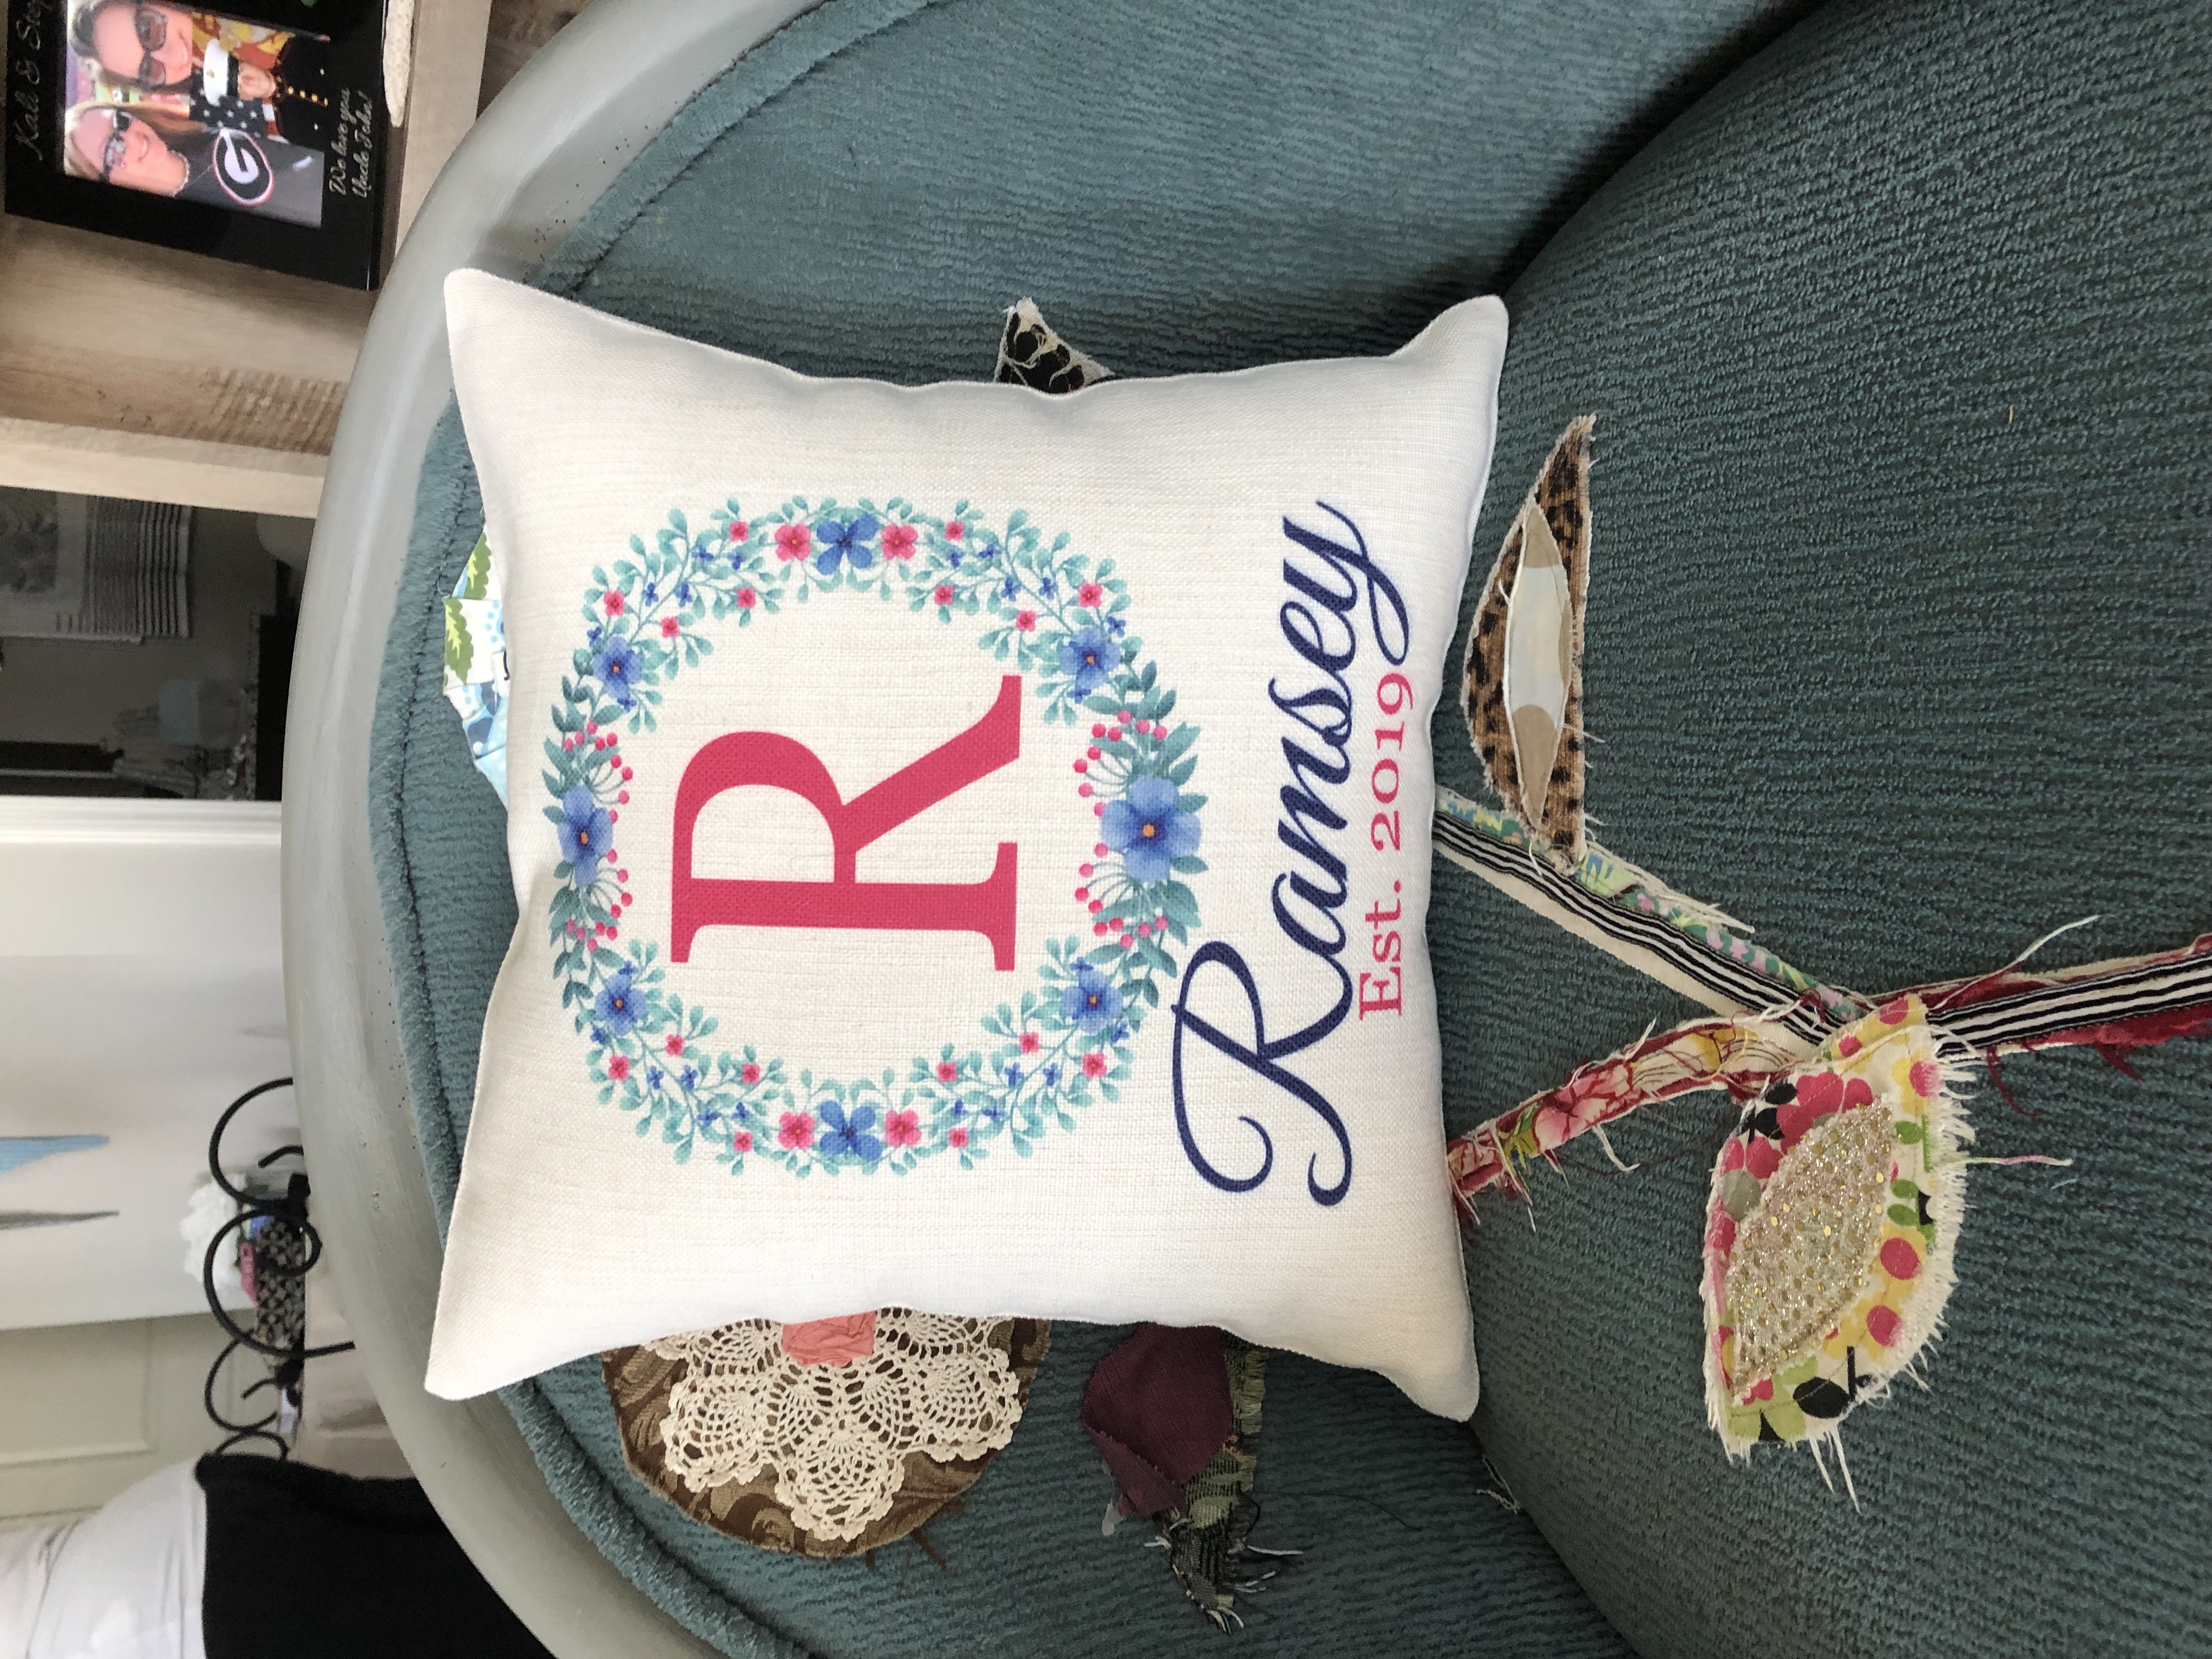 This linen pillow was created as a wedding gift for a happy couple. The pillow case subs beauti